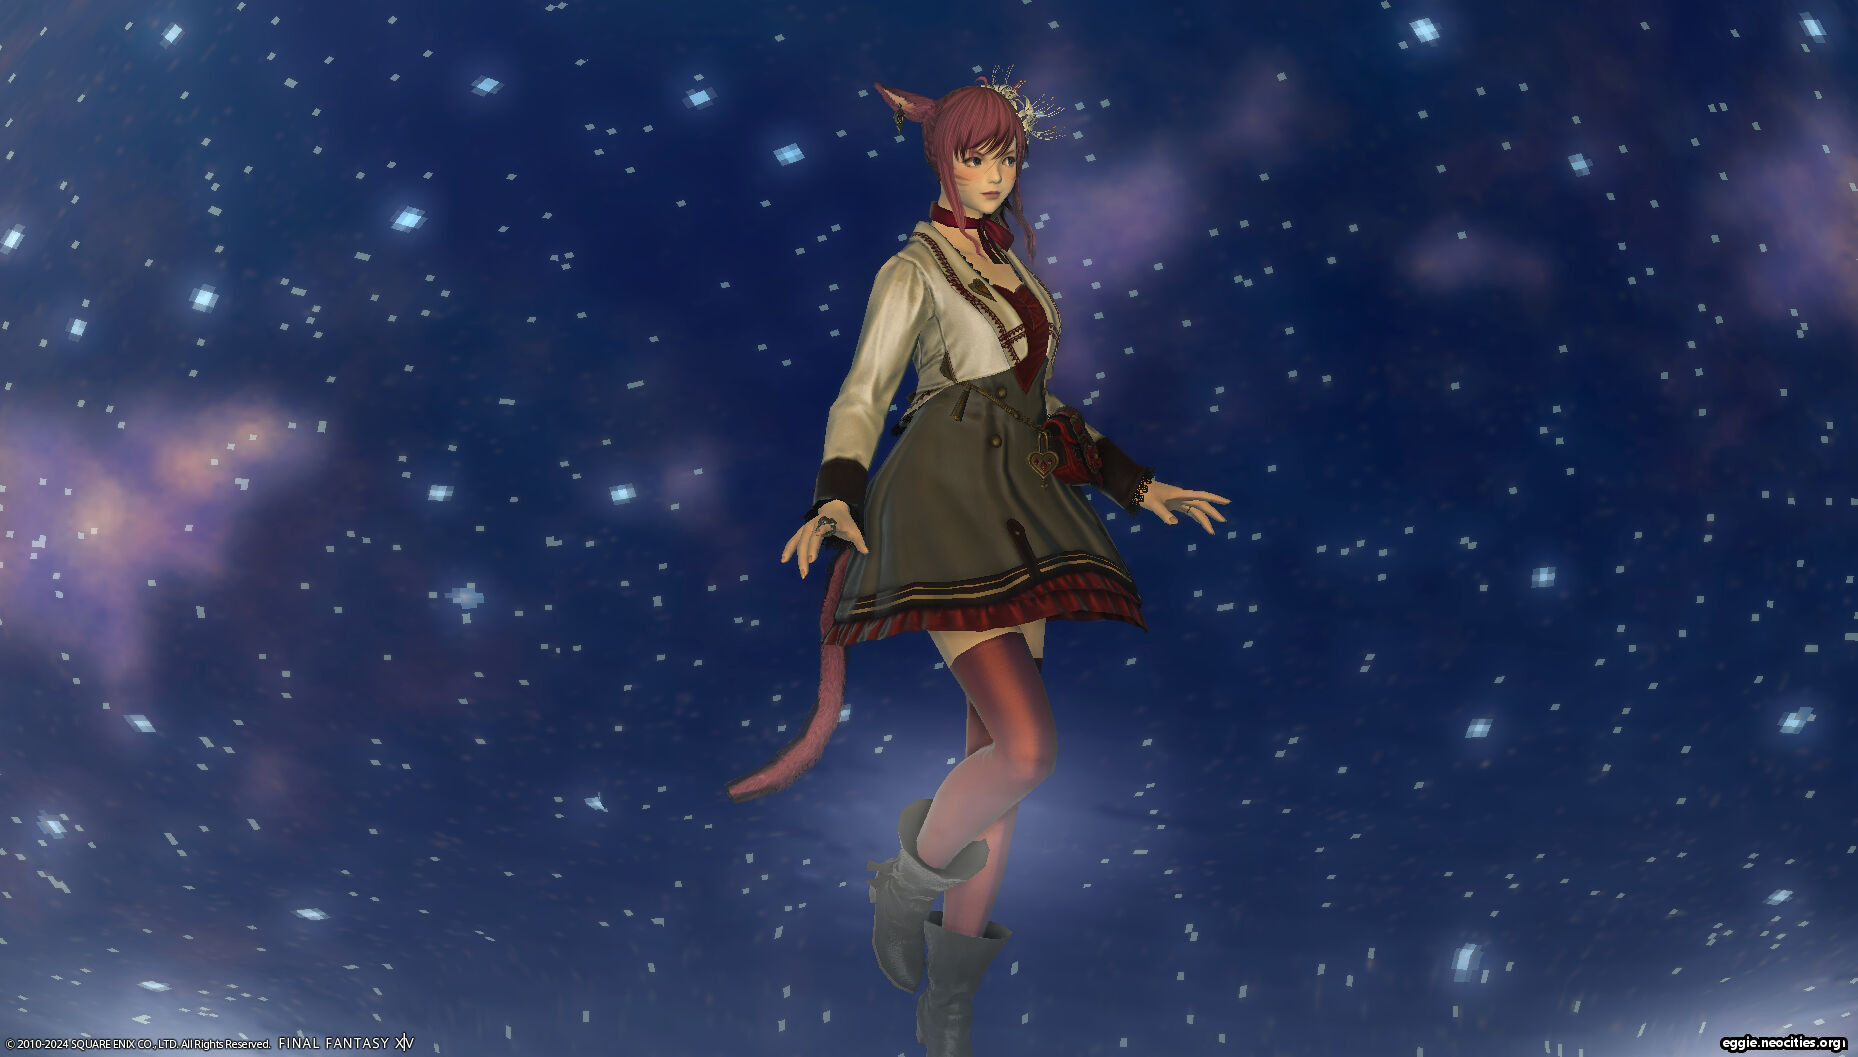 Zel floating in the Mew Misv mount. It is zoomed in close so you can only see the starry background